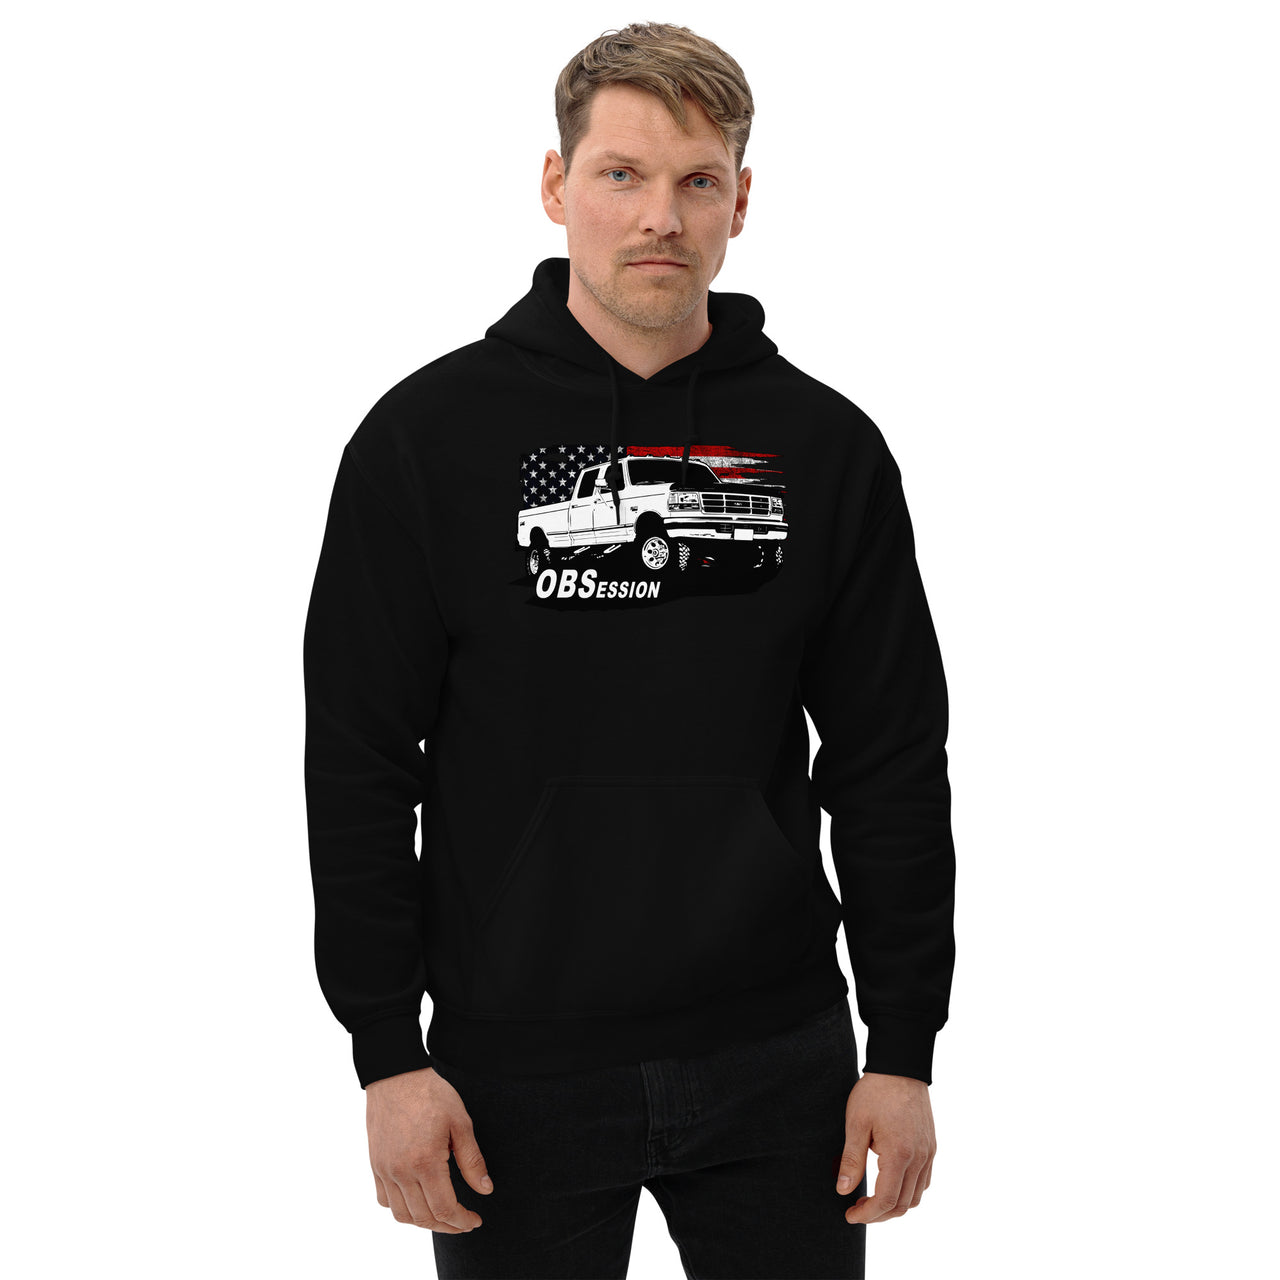 OBS Crew Cab Truck Hoodie with American Flag design - modeled in black